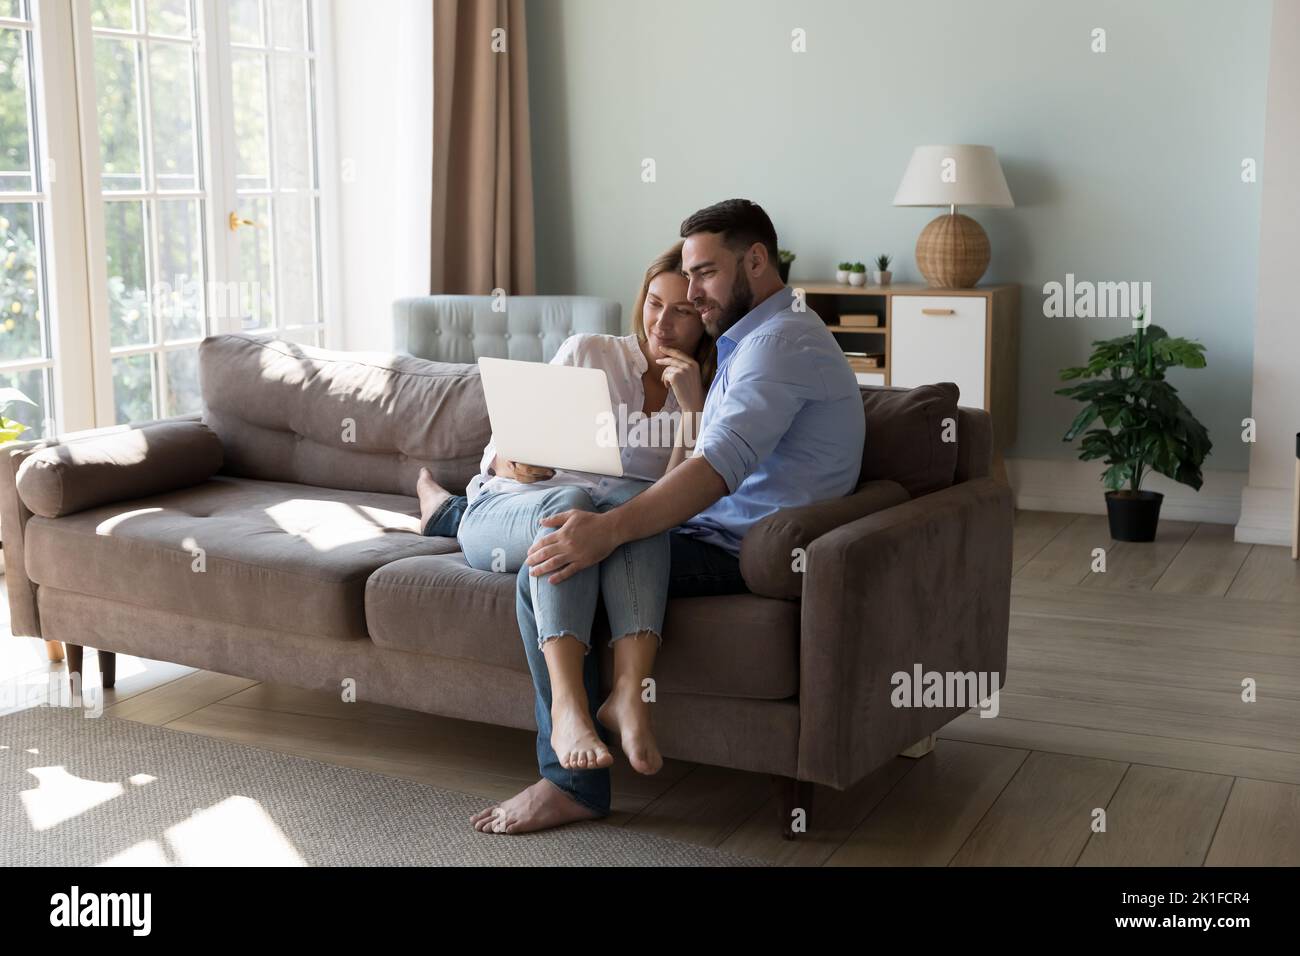 Young millennial couple sharing laptop on couch Stock Photo